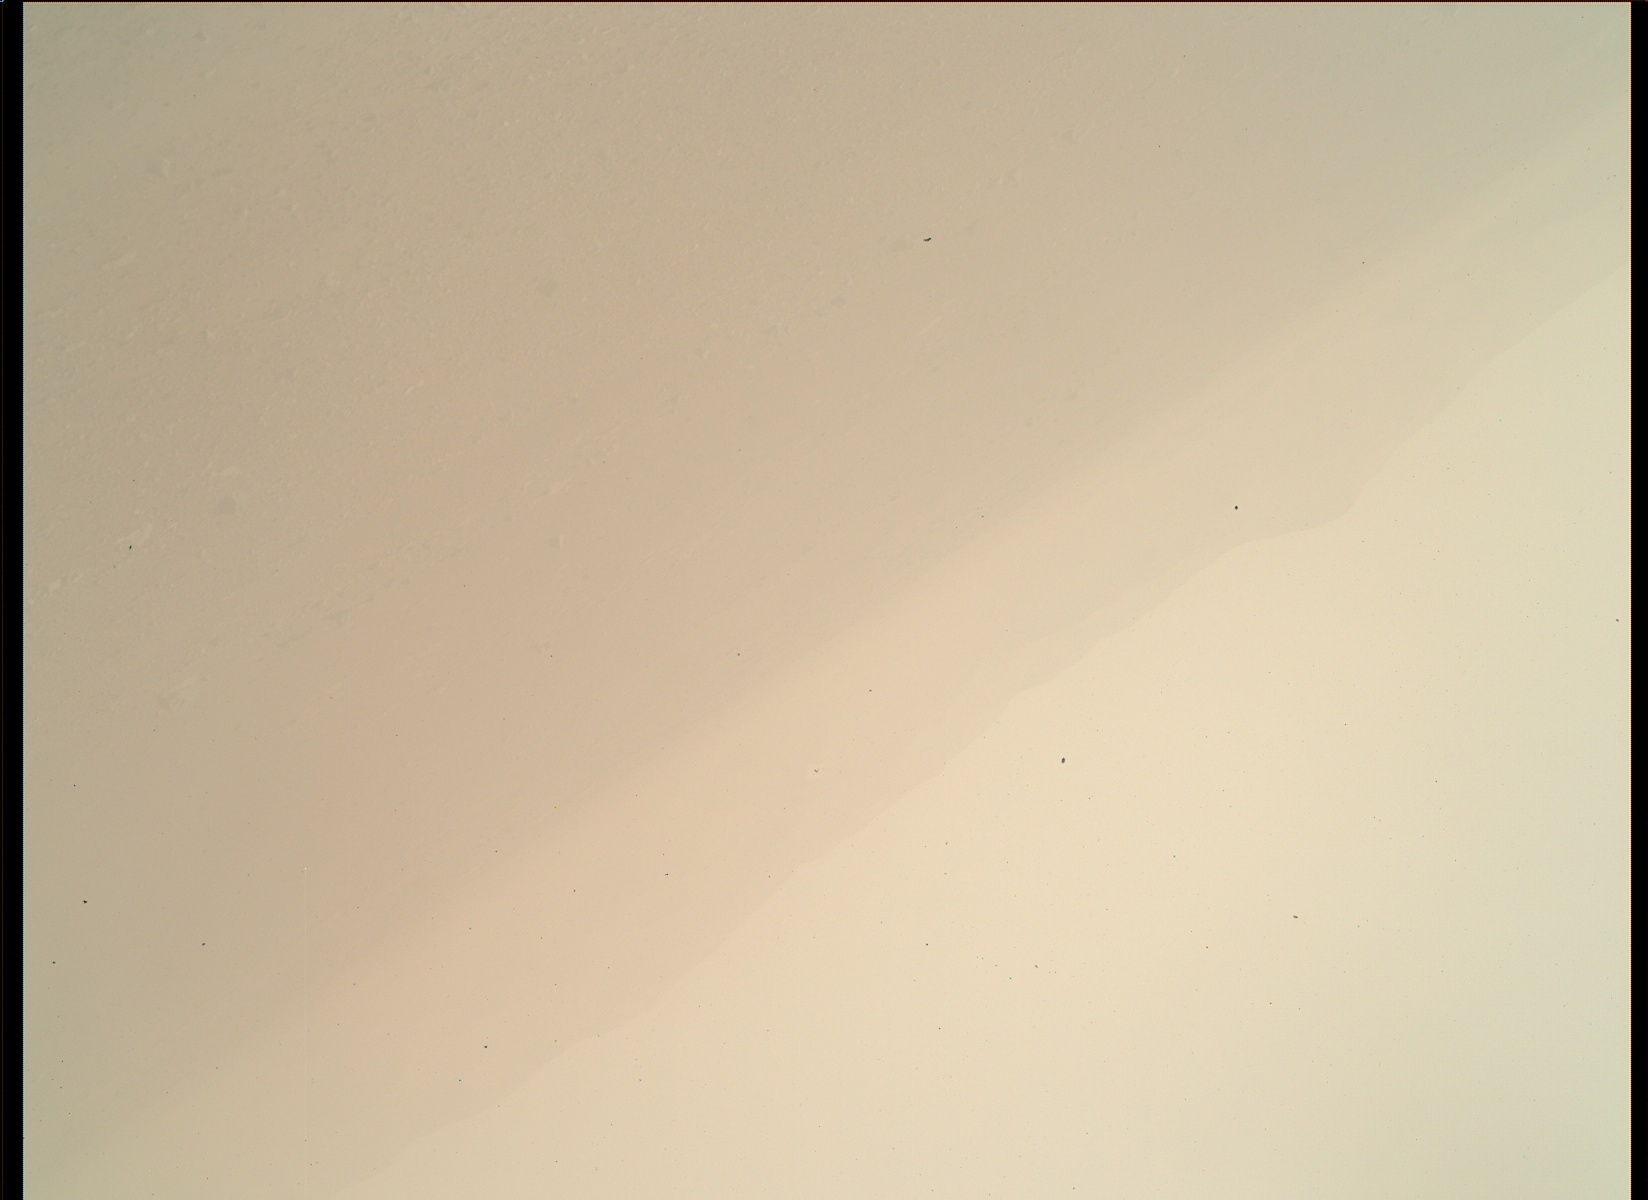 Nasa's Mars rover Curiosity acquired this image using its Mars Hand Lens Imager (MAHLI) on Sol 1